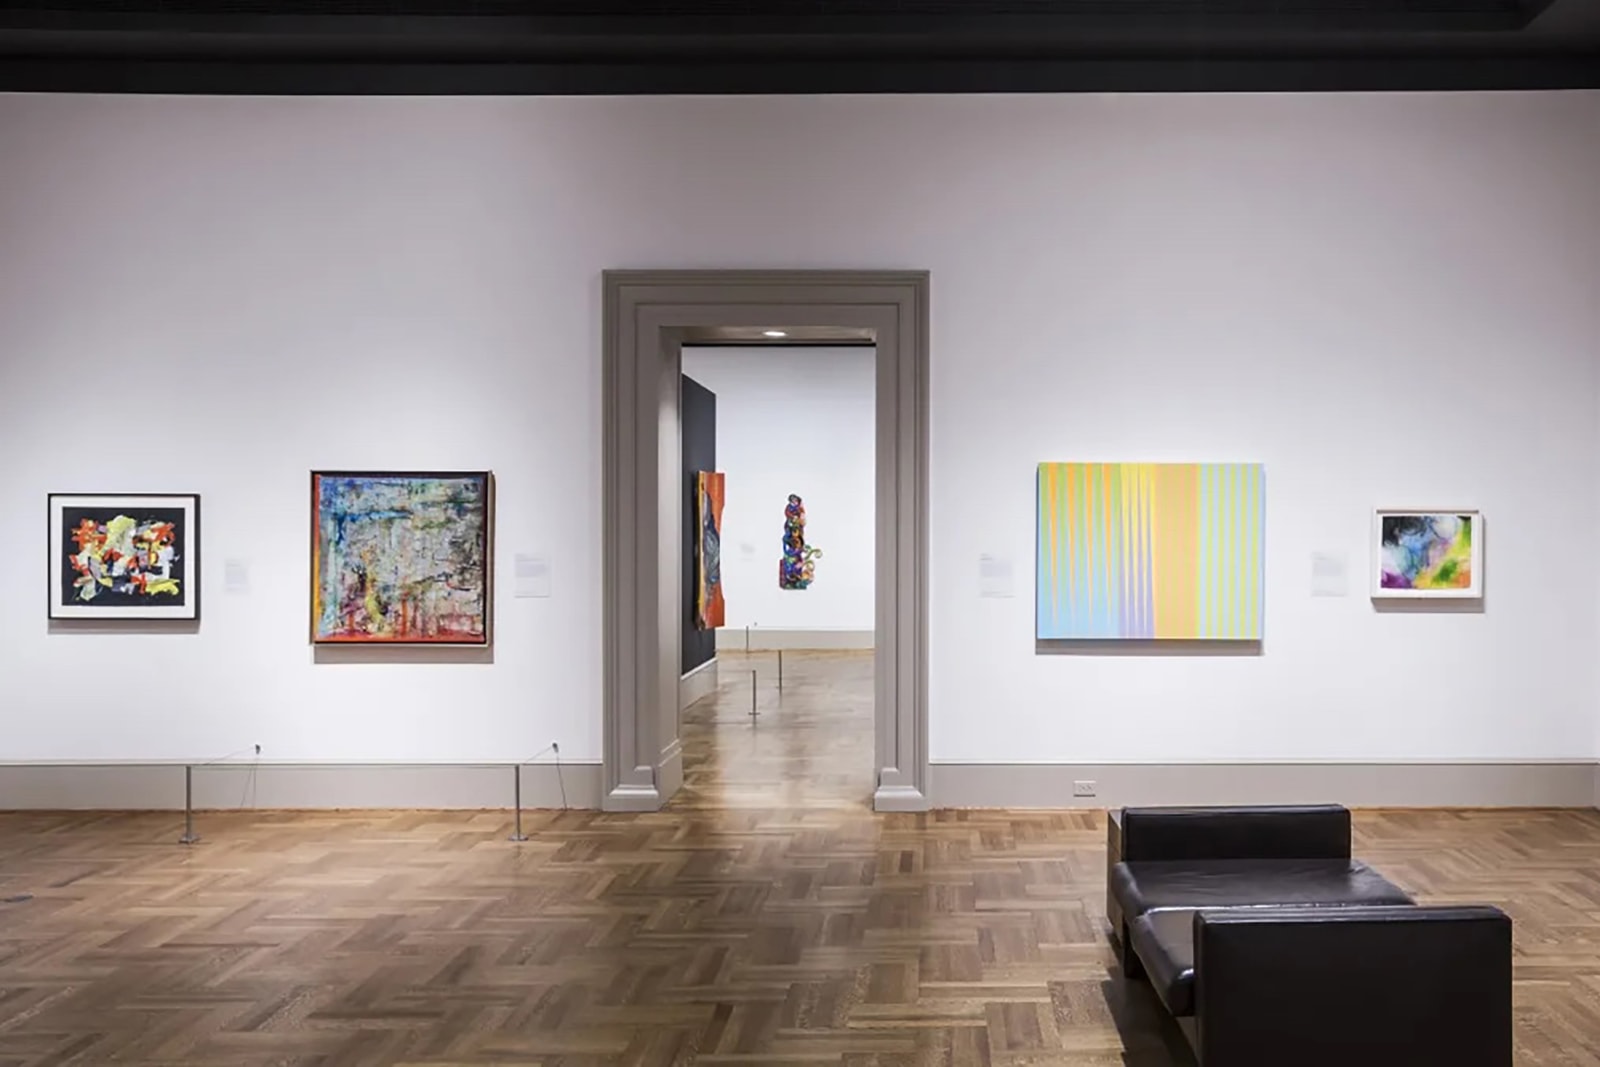 Installation view, The Shape of Abstraction: Selections from the Ollie Collection, Saint Louis Art Museum, 2019-2020